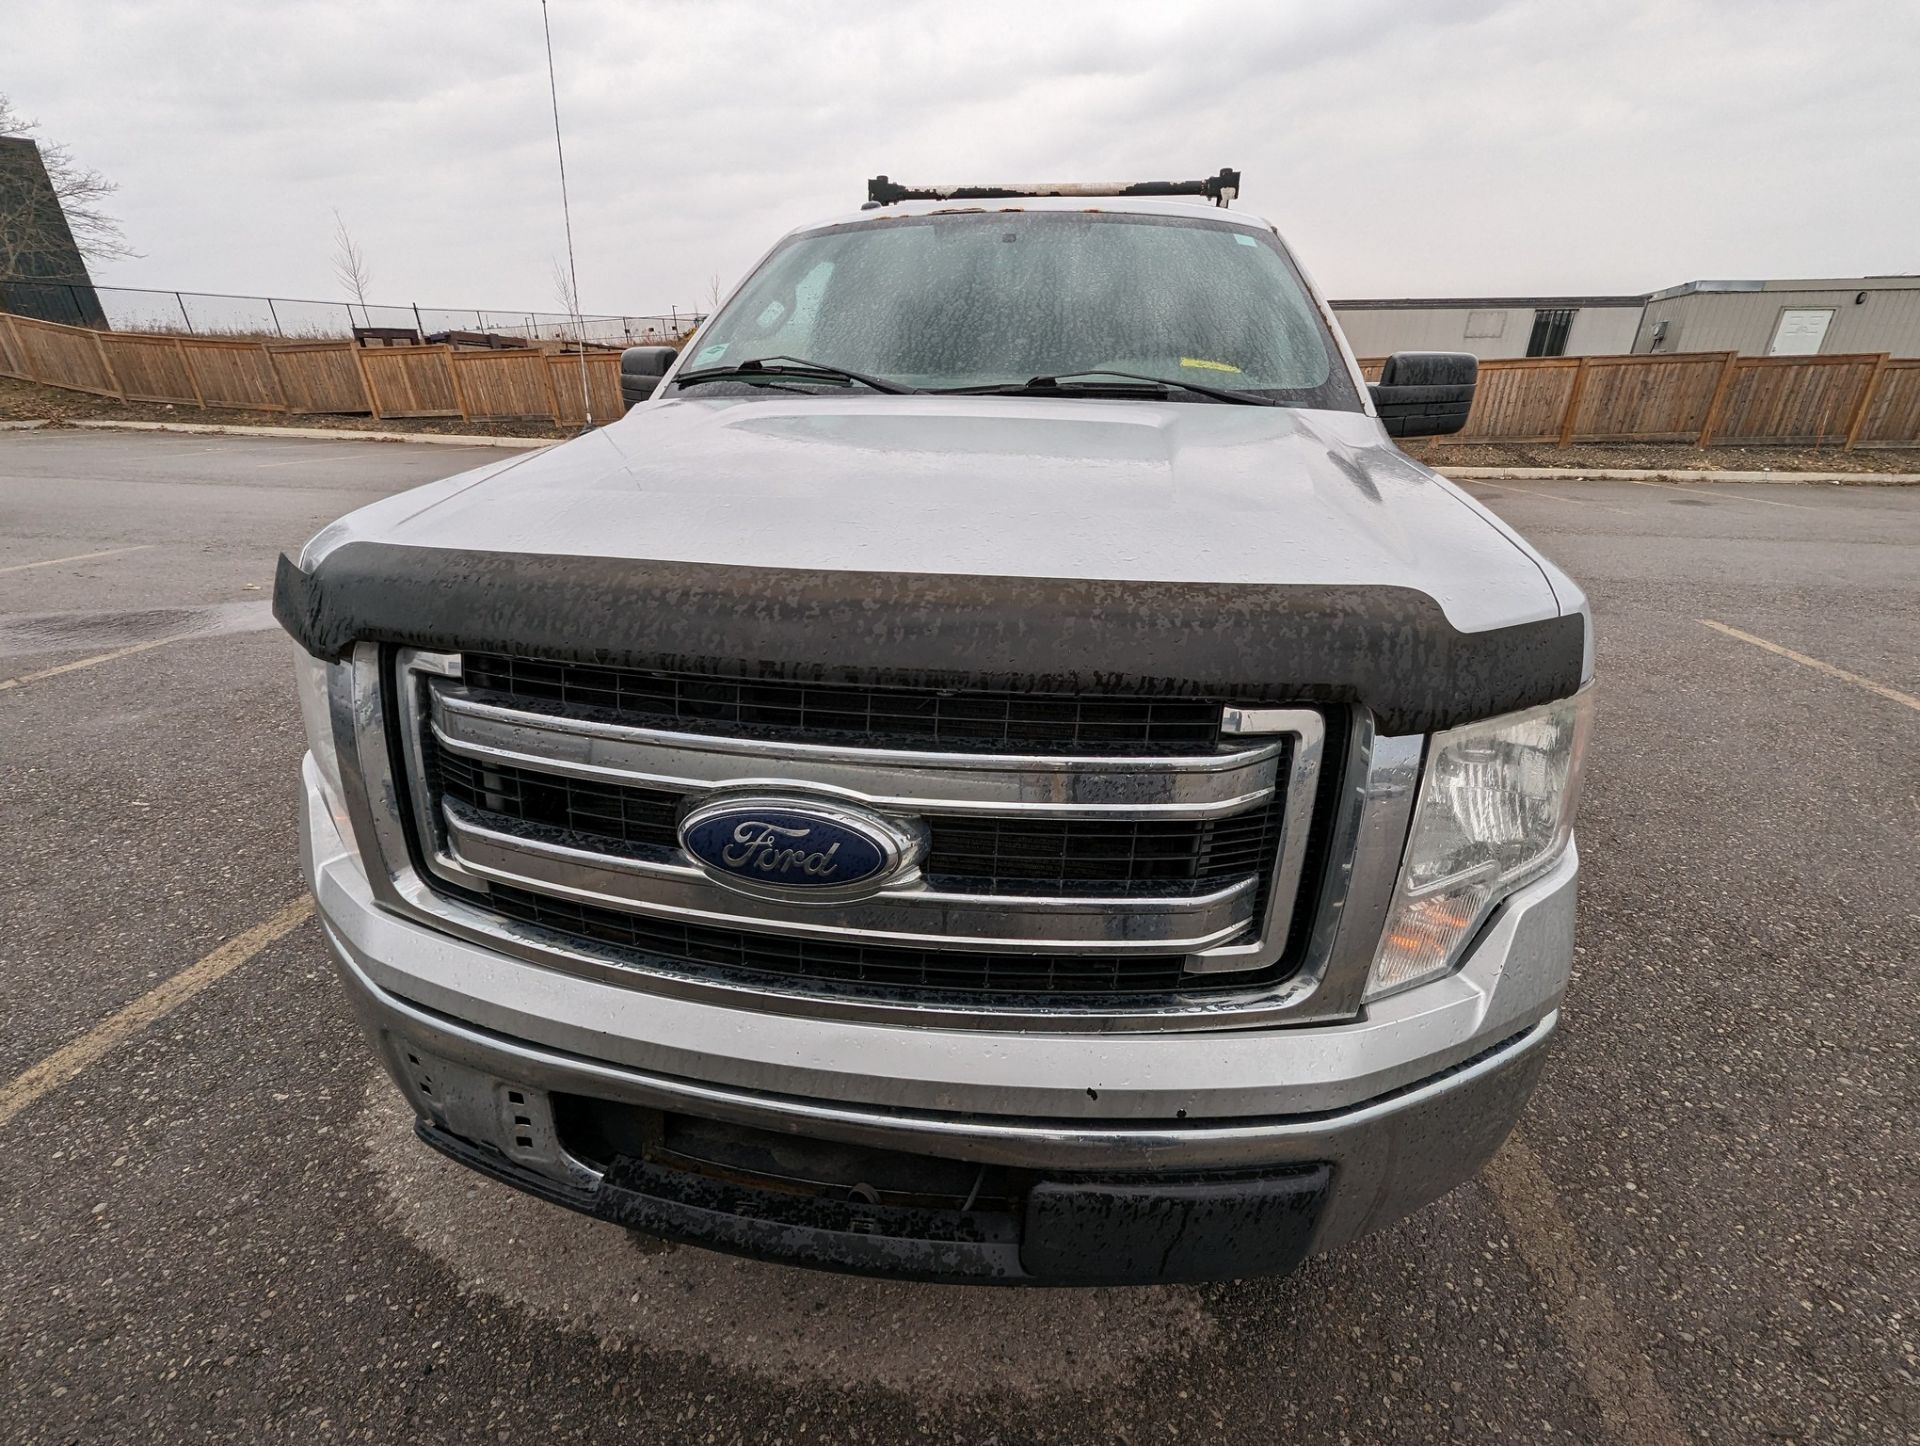 2013 FORD F150 XLT PICKUP TRUCK, VIN# 1FTNF1CF2DKE53797, APPROX. 411,982KMS (NO BLACK TOOL BOXES) - Image 2 of 12